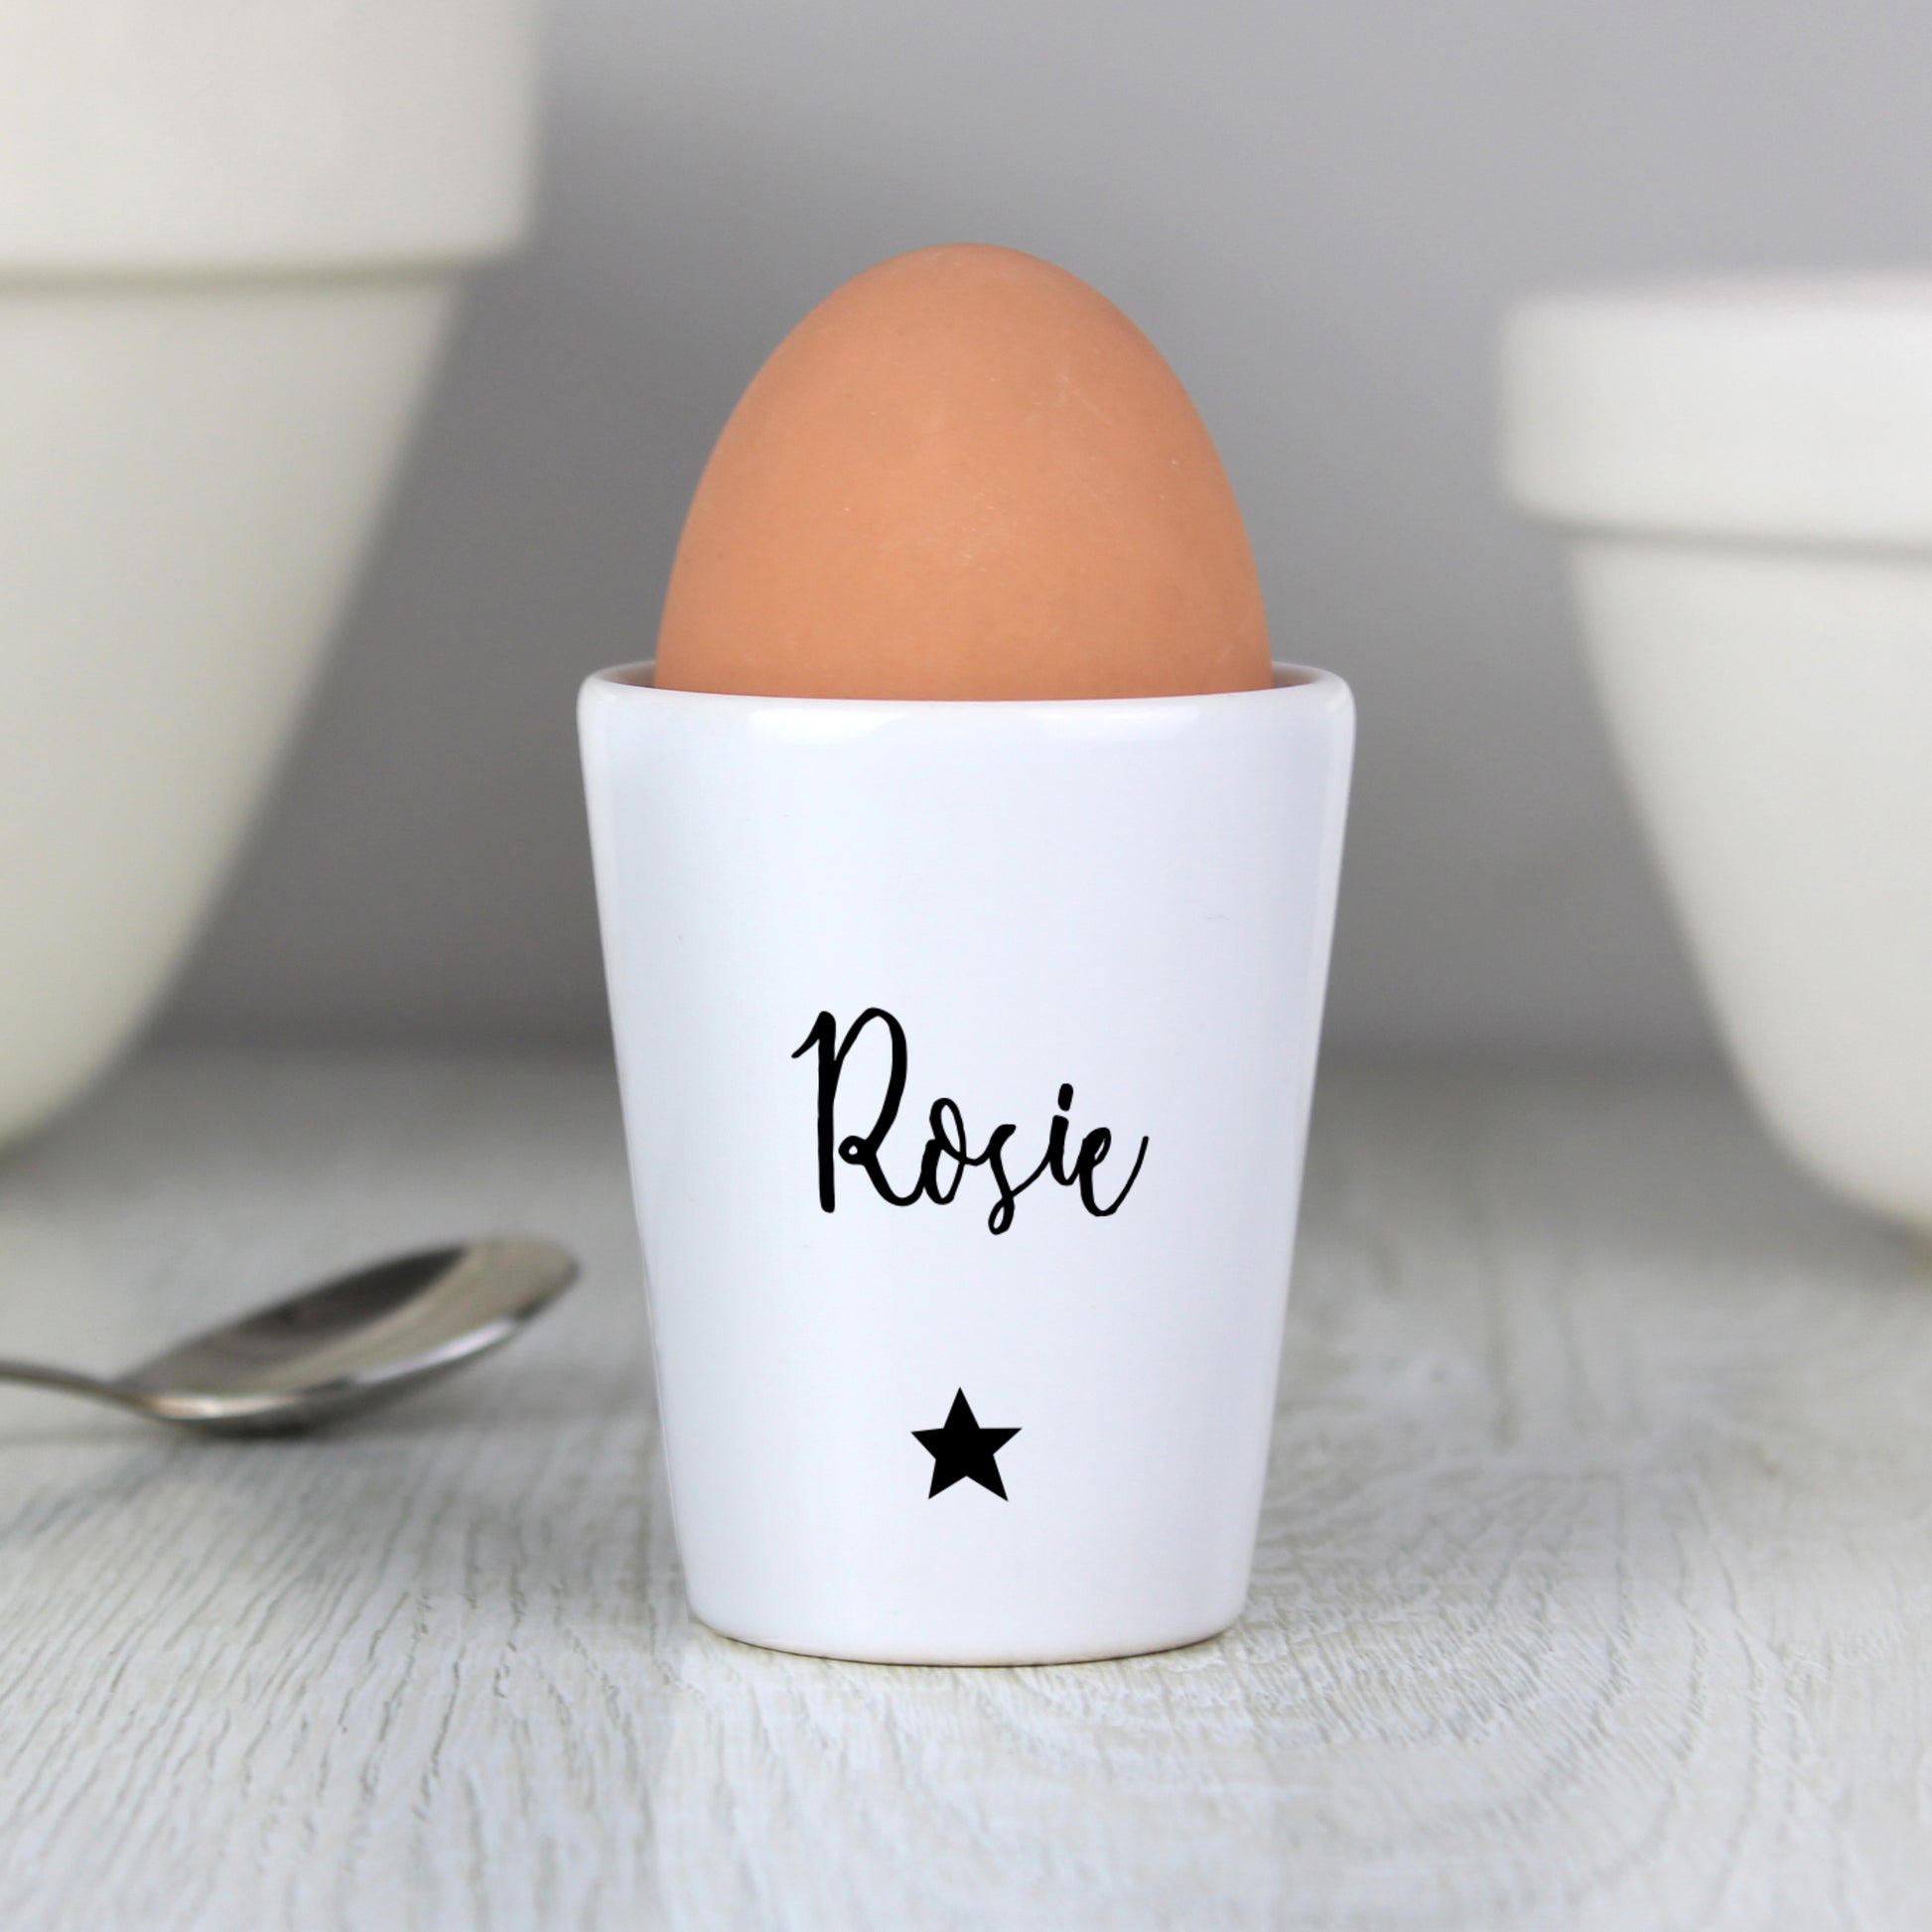 White ceramic egg cup personalised with name and star in black